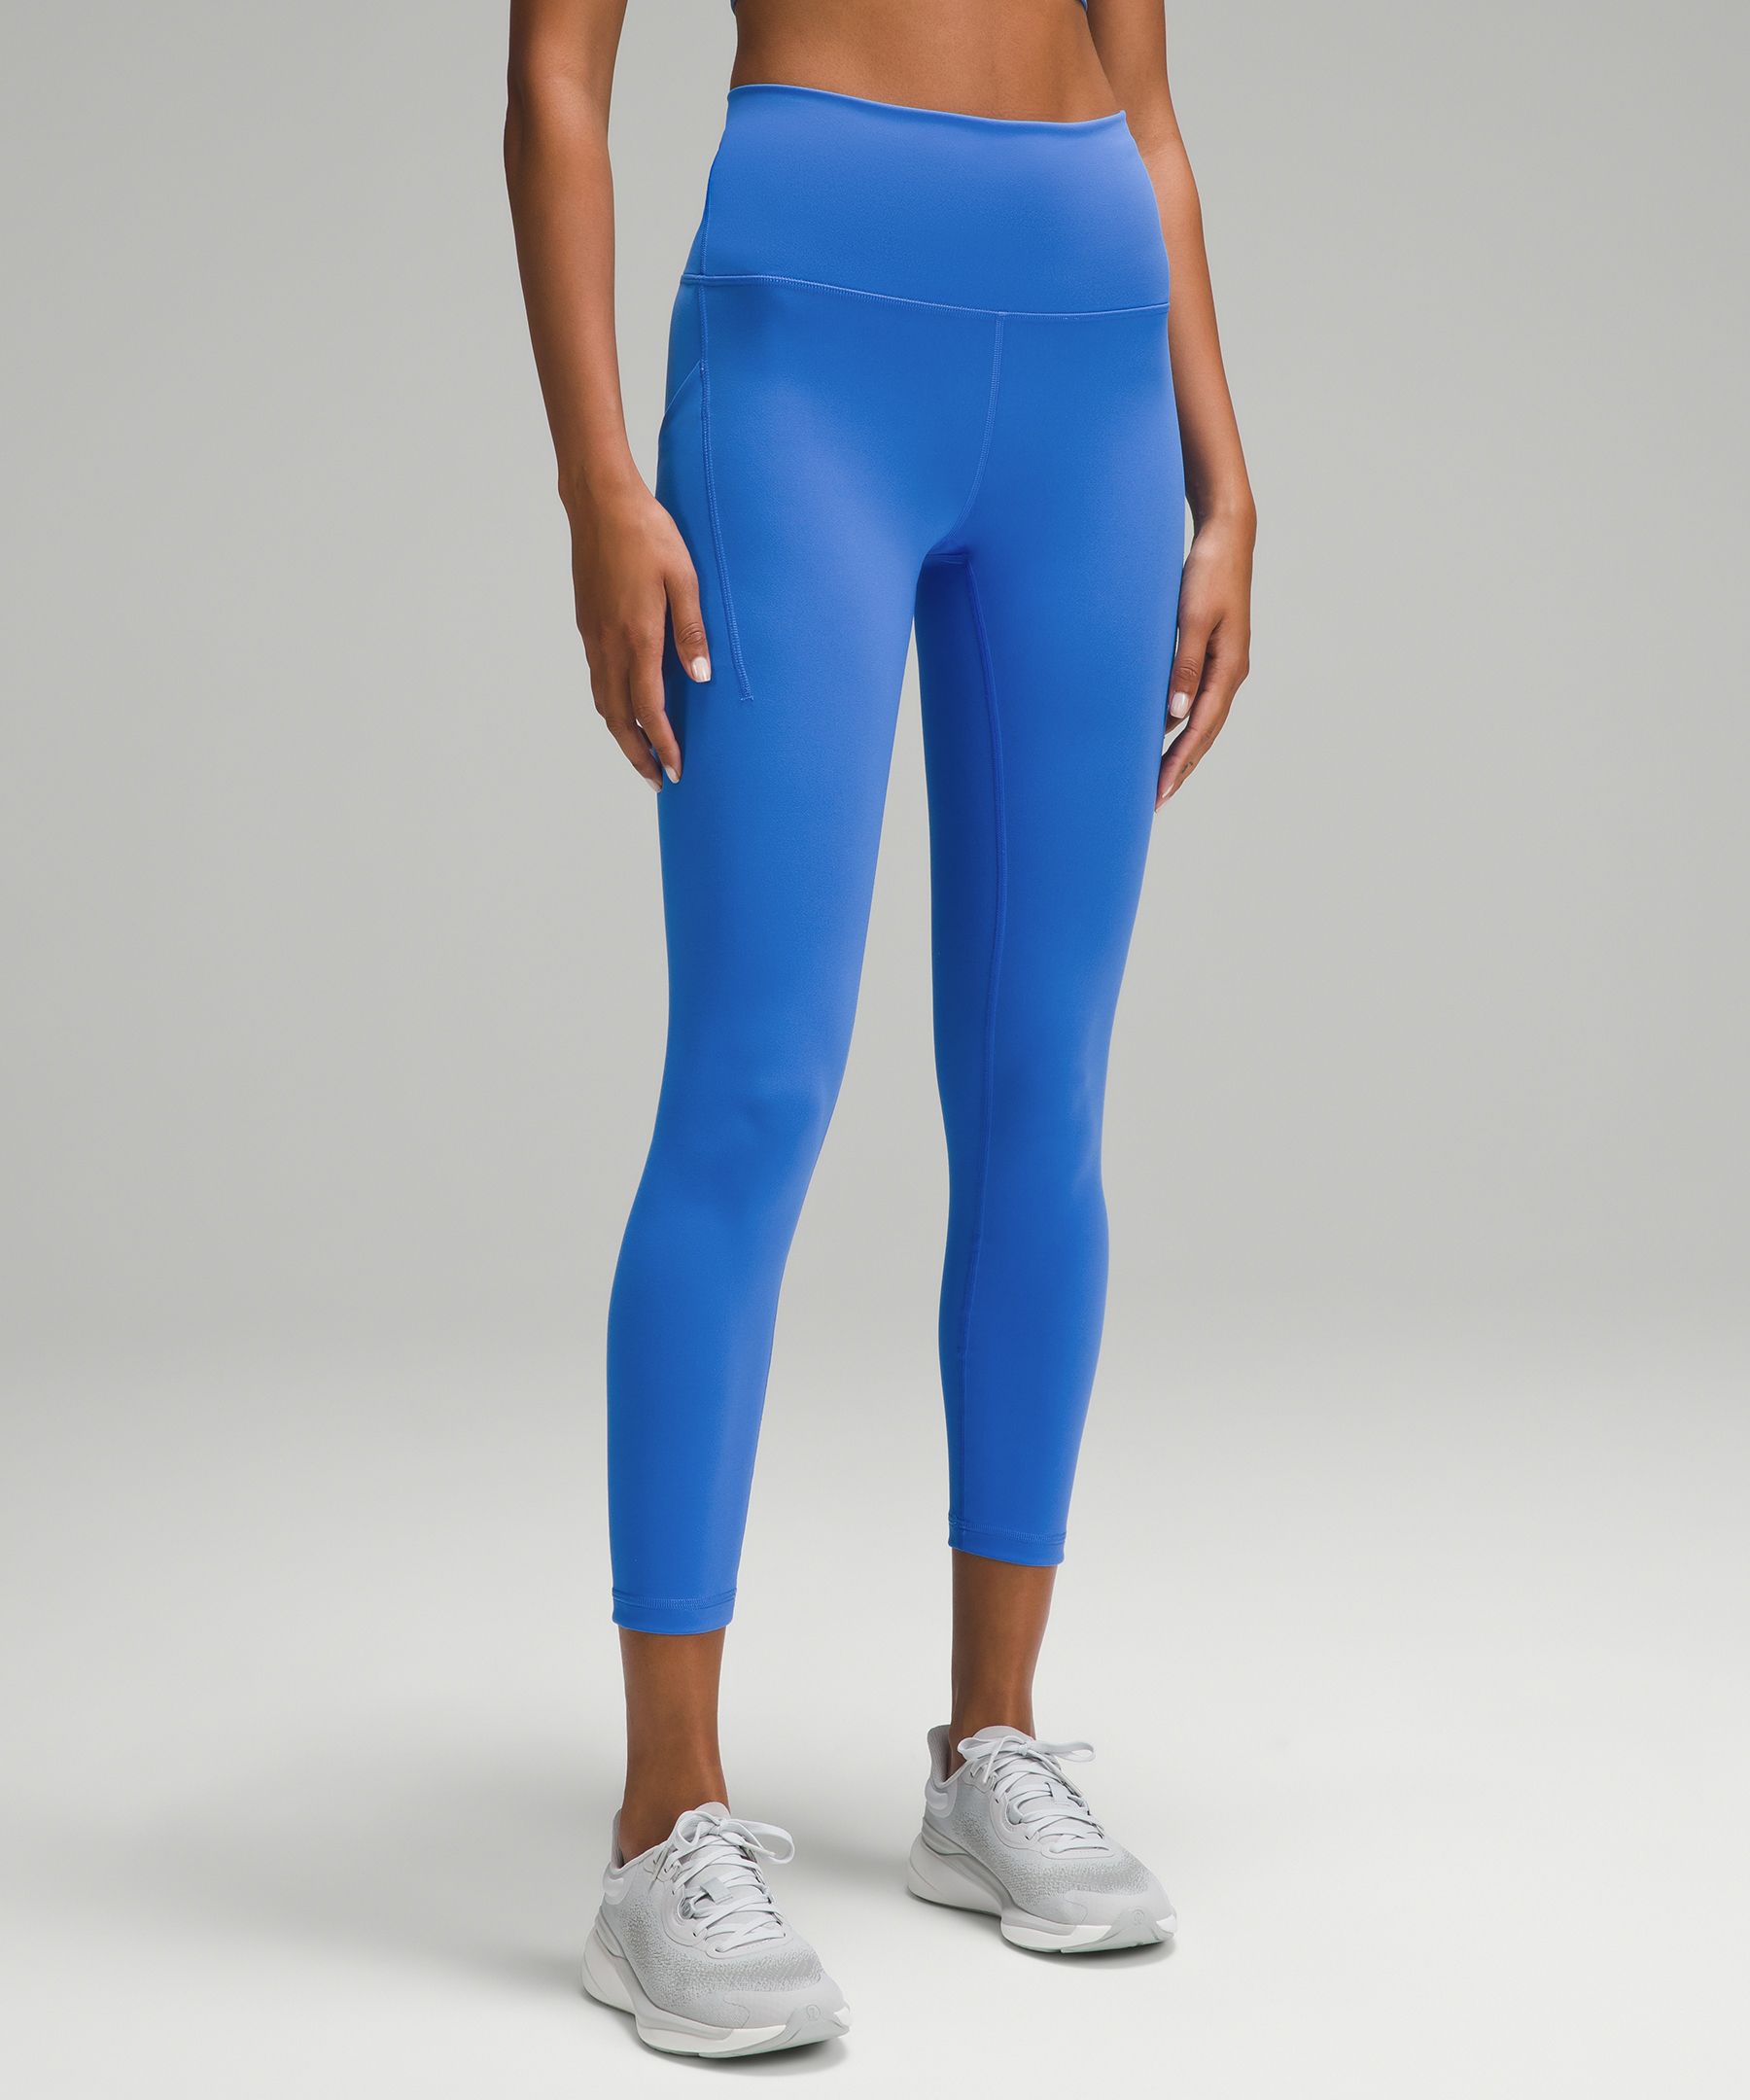 Lululemon All The Right Places Crop II (23) Cerulean Blue Leggings Yoga  Size 4